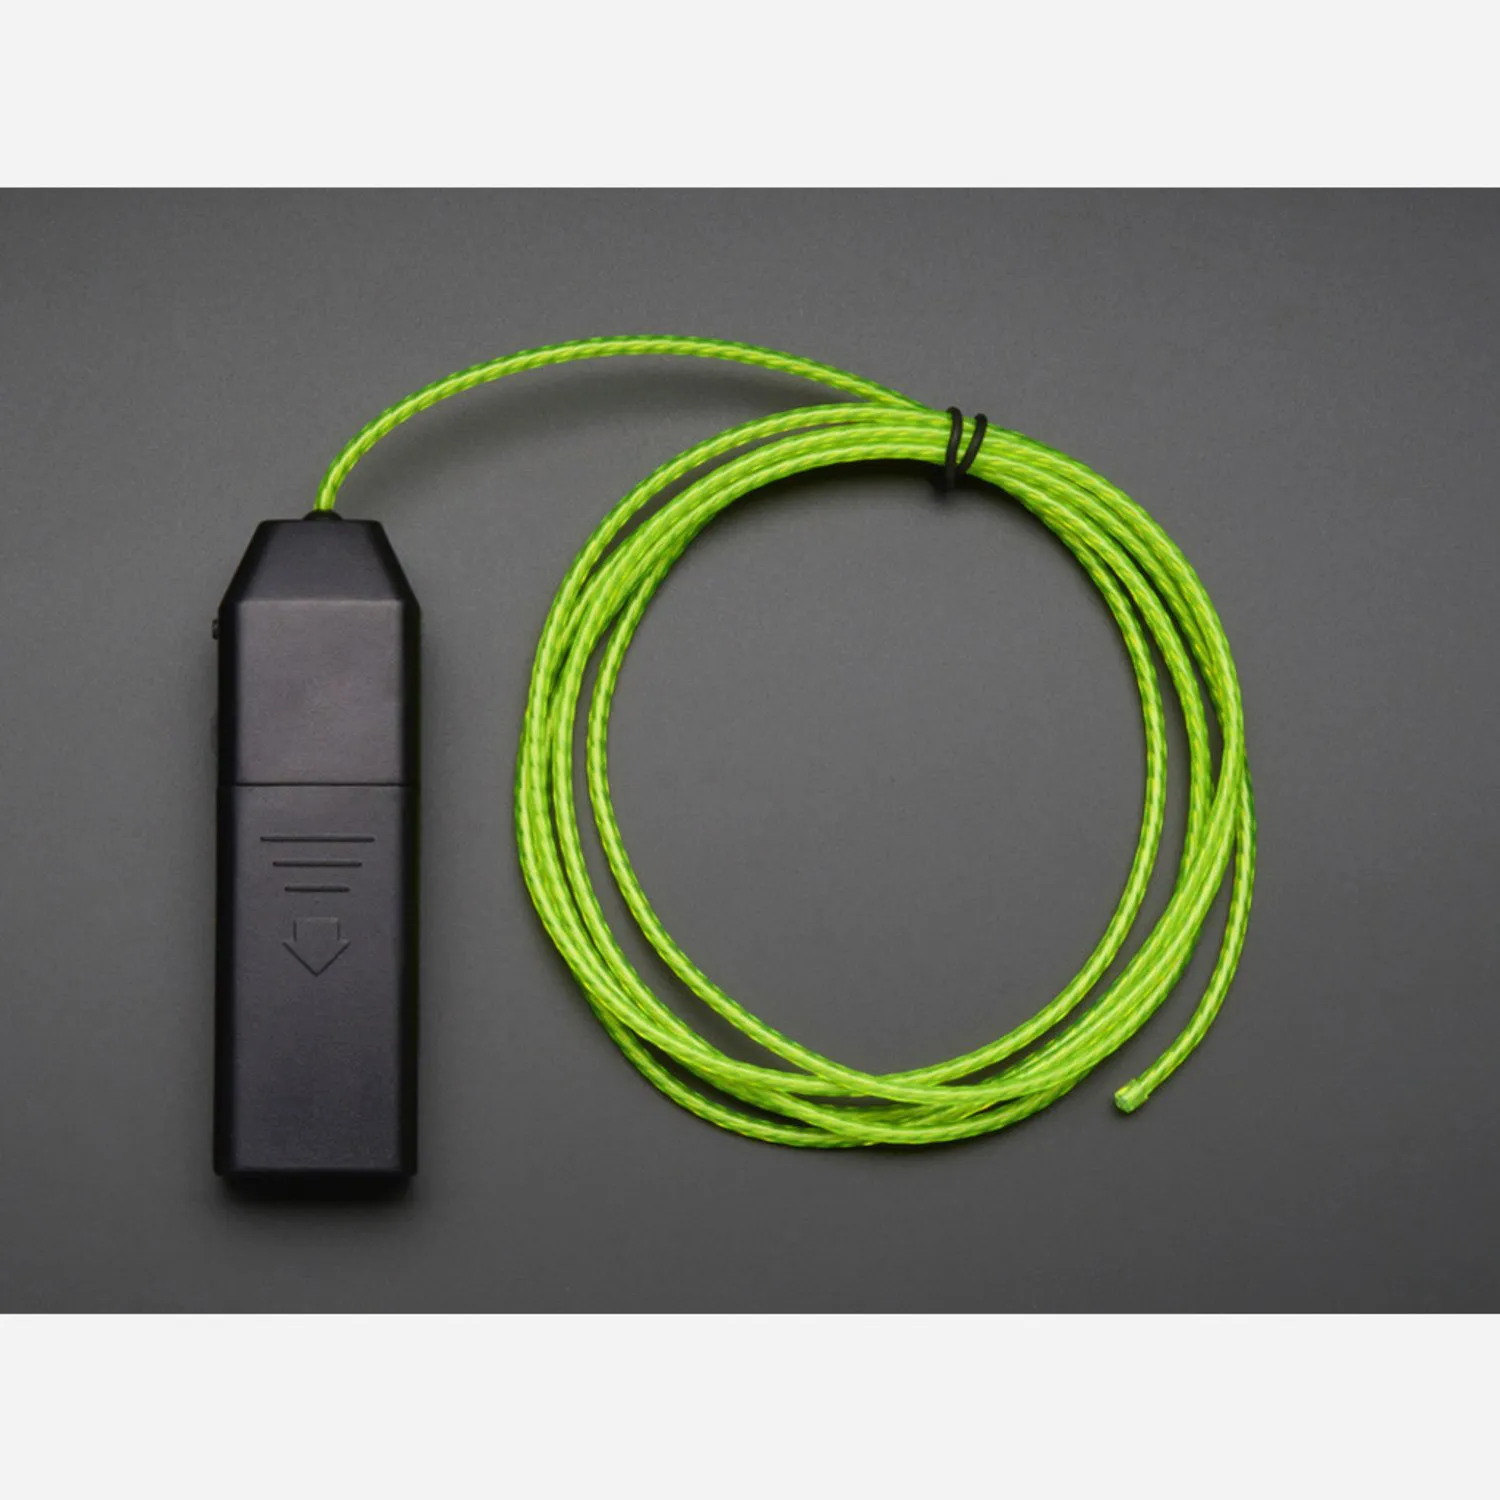 Photo of EL Flowing Effect Wire with Inverter - Green 2.0 meter (6.5 ft)